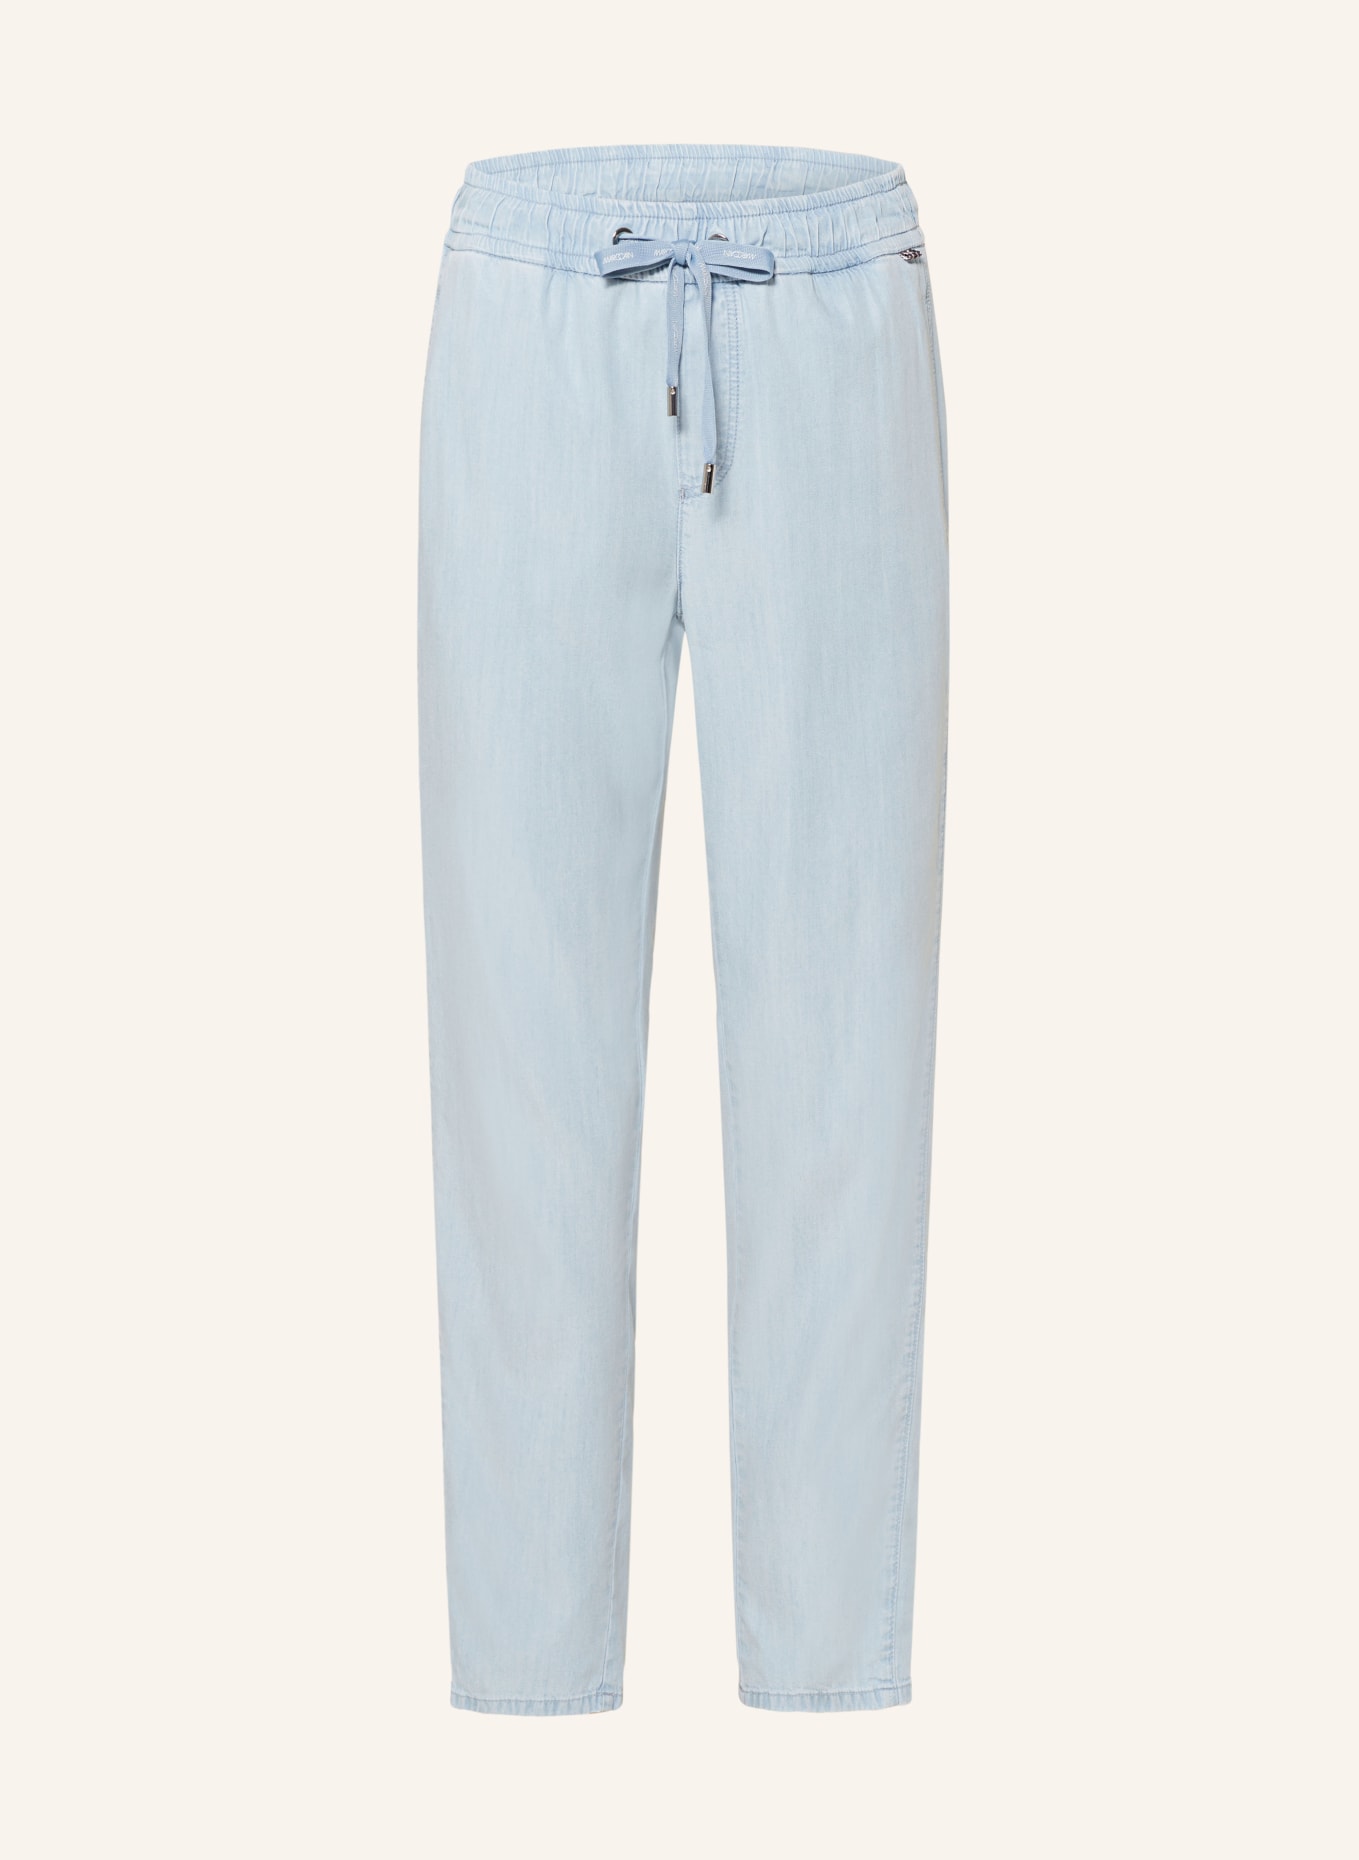 MARC CAIN Pants RIVERA in denim look, Color: 351 baby blue (Image 1)